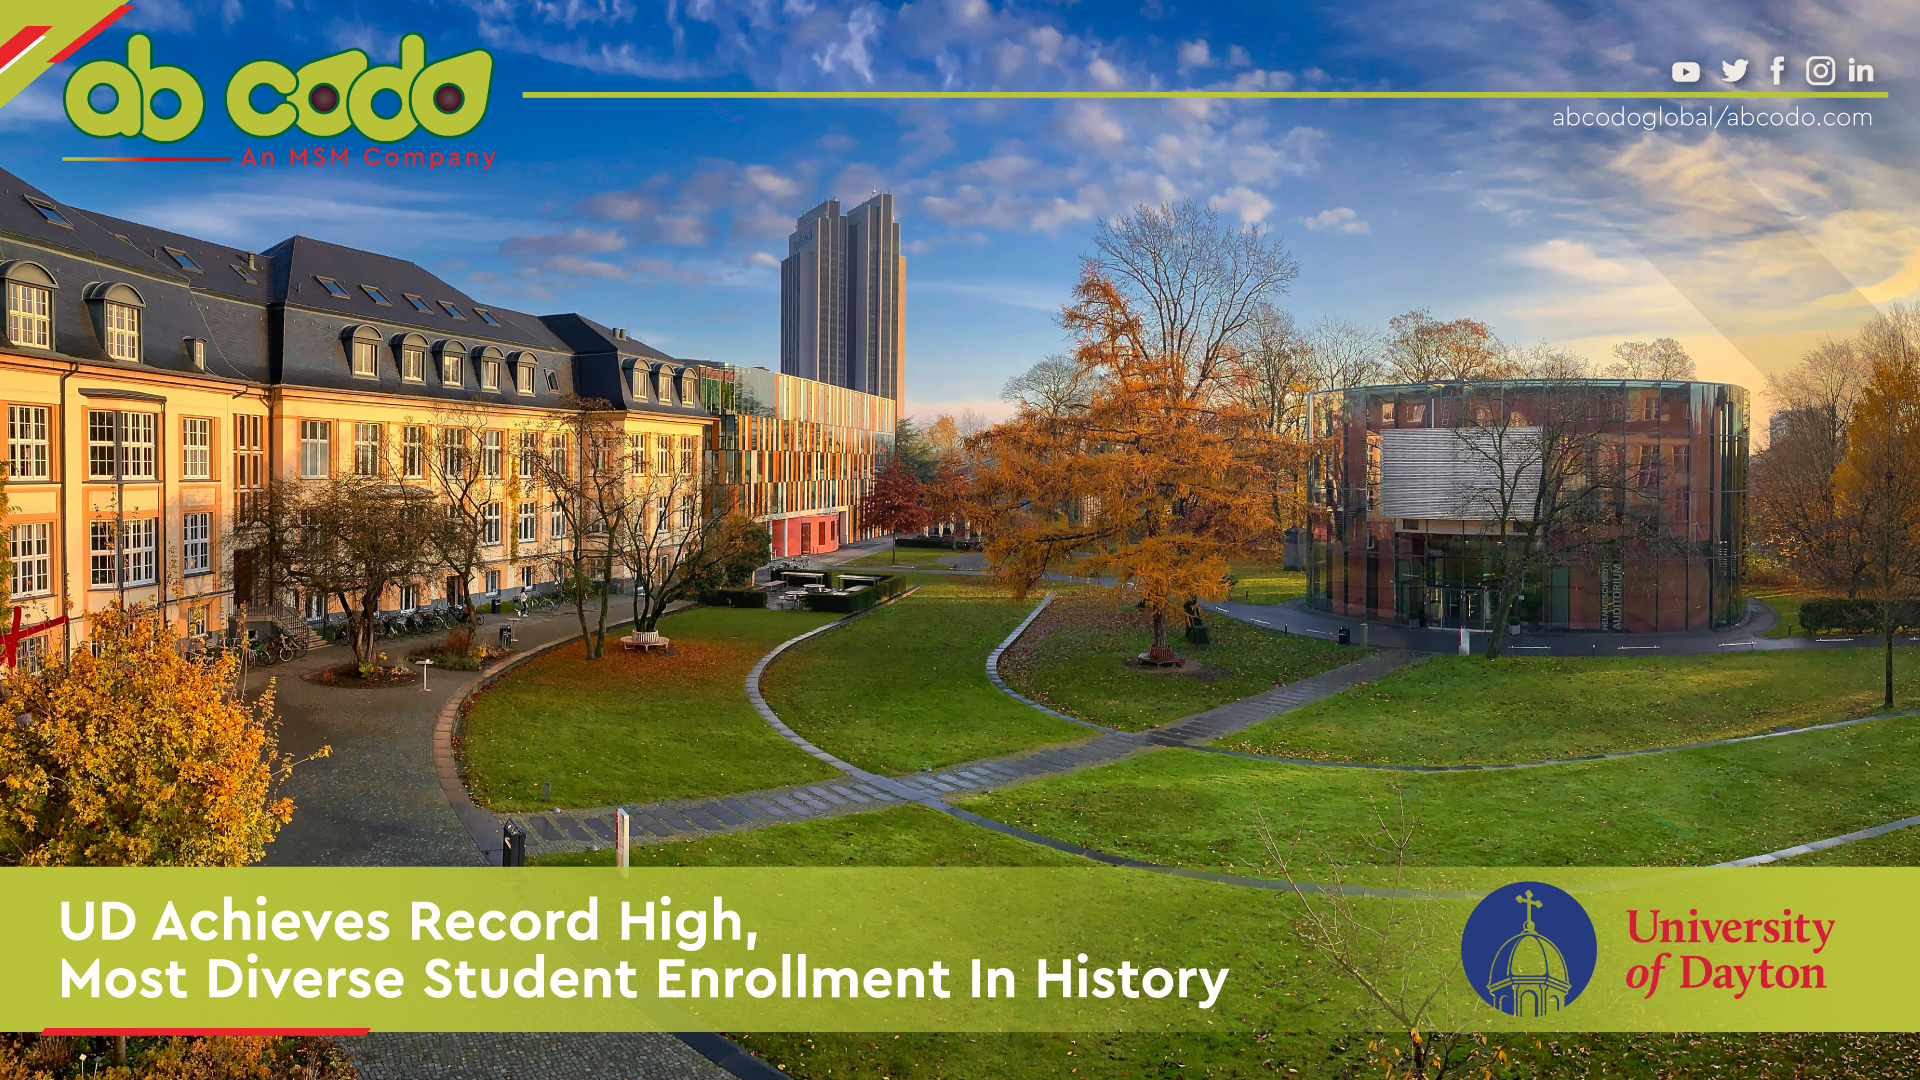 UD Achieves Record High, Most Diverse Student Enrollment In History